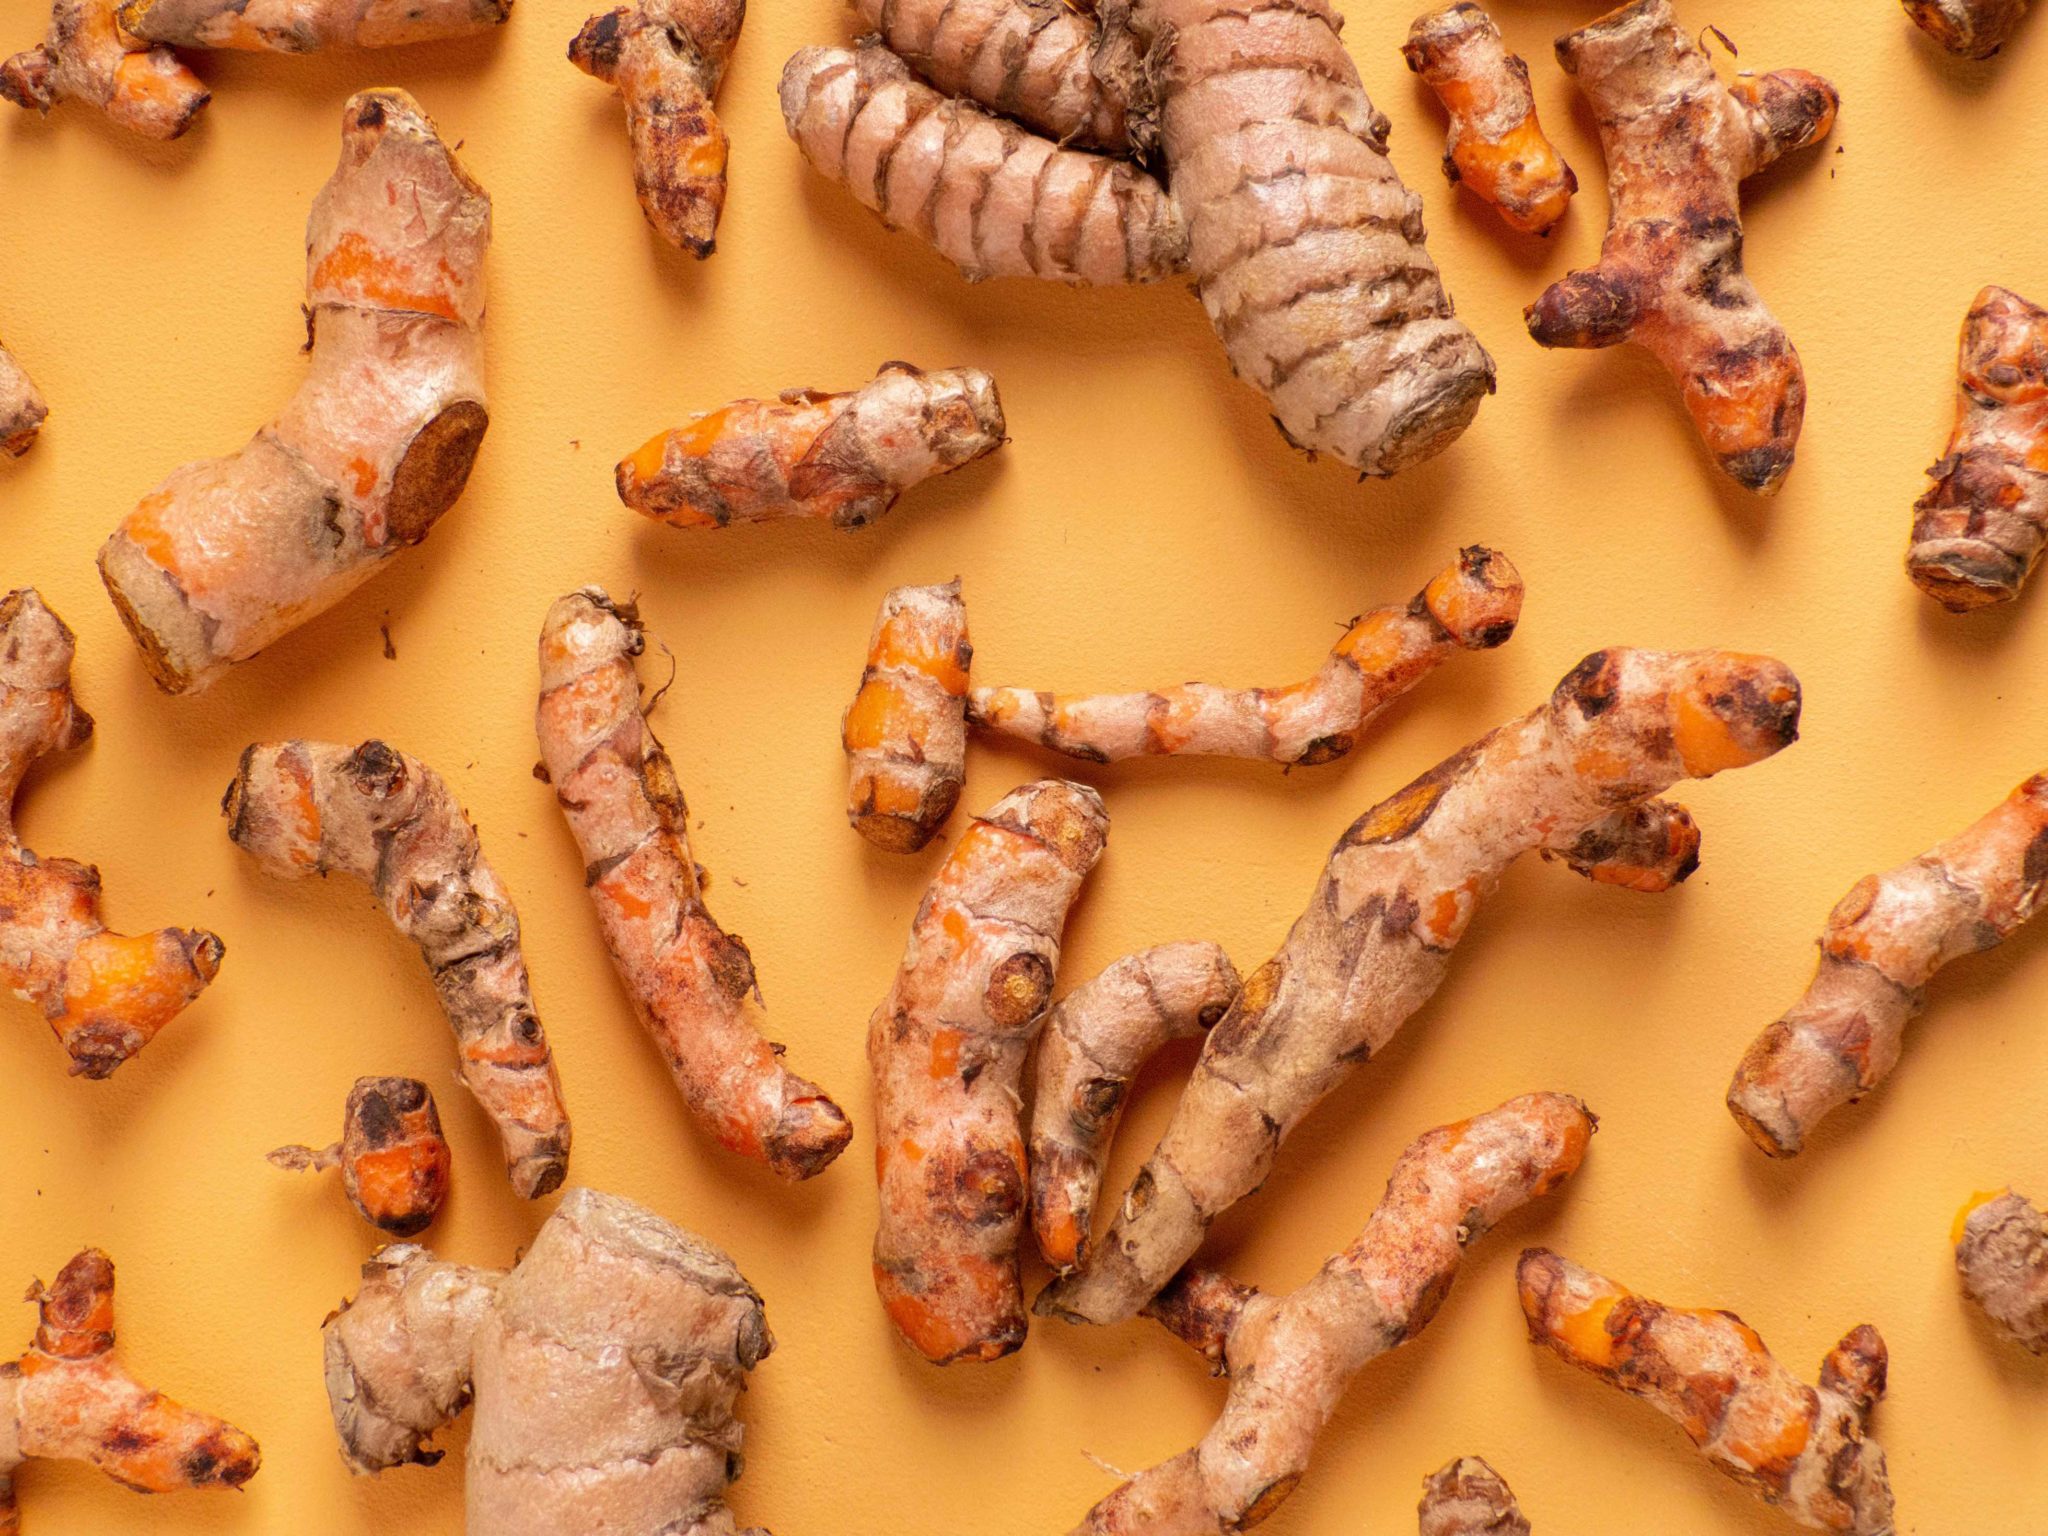 turmeric may help your liver heal